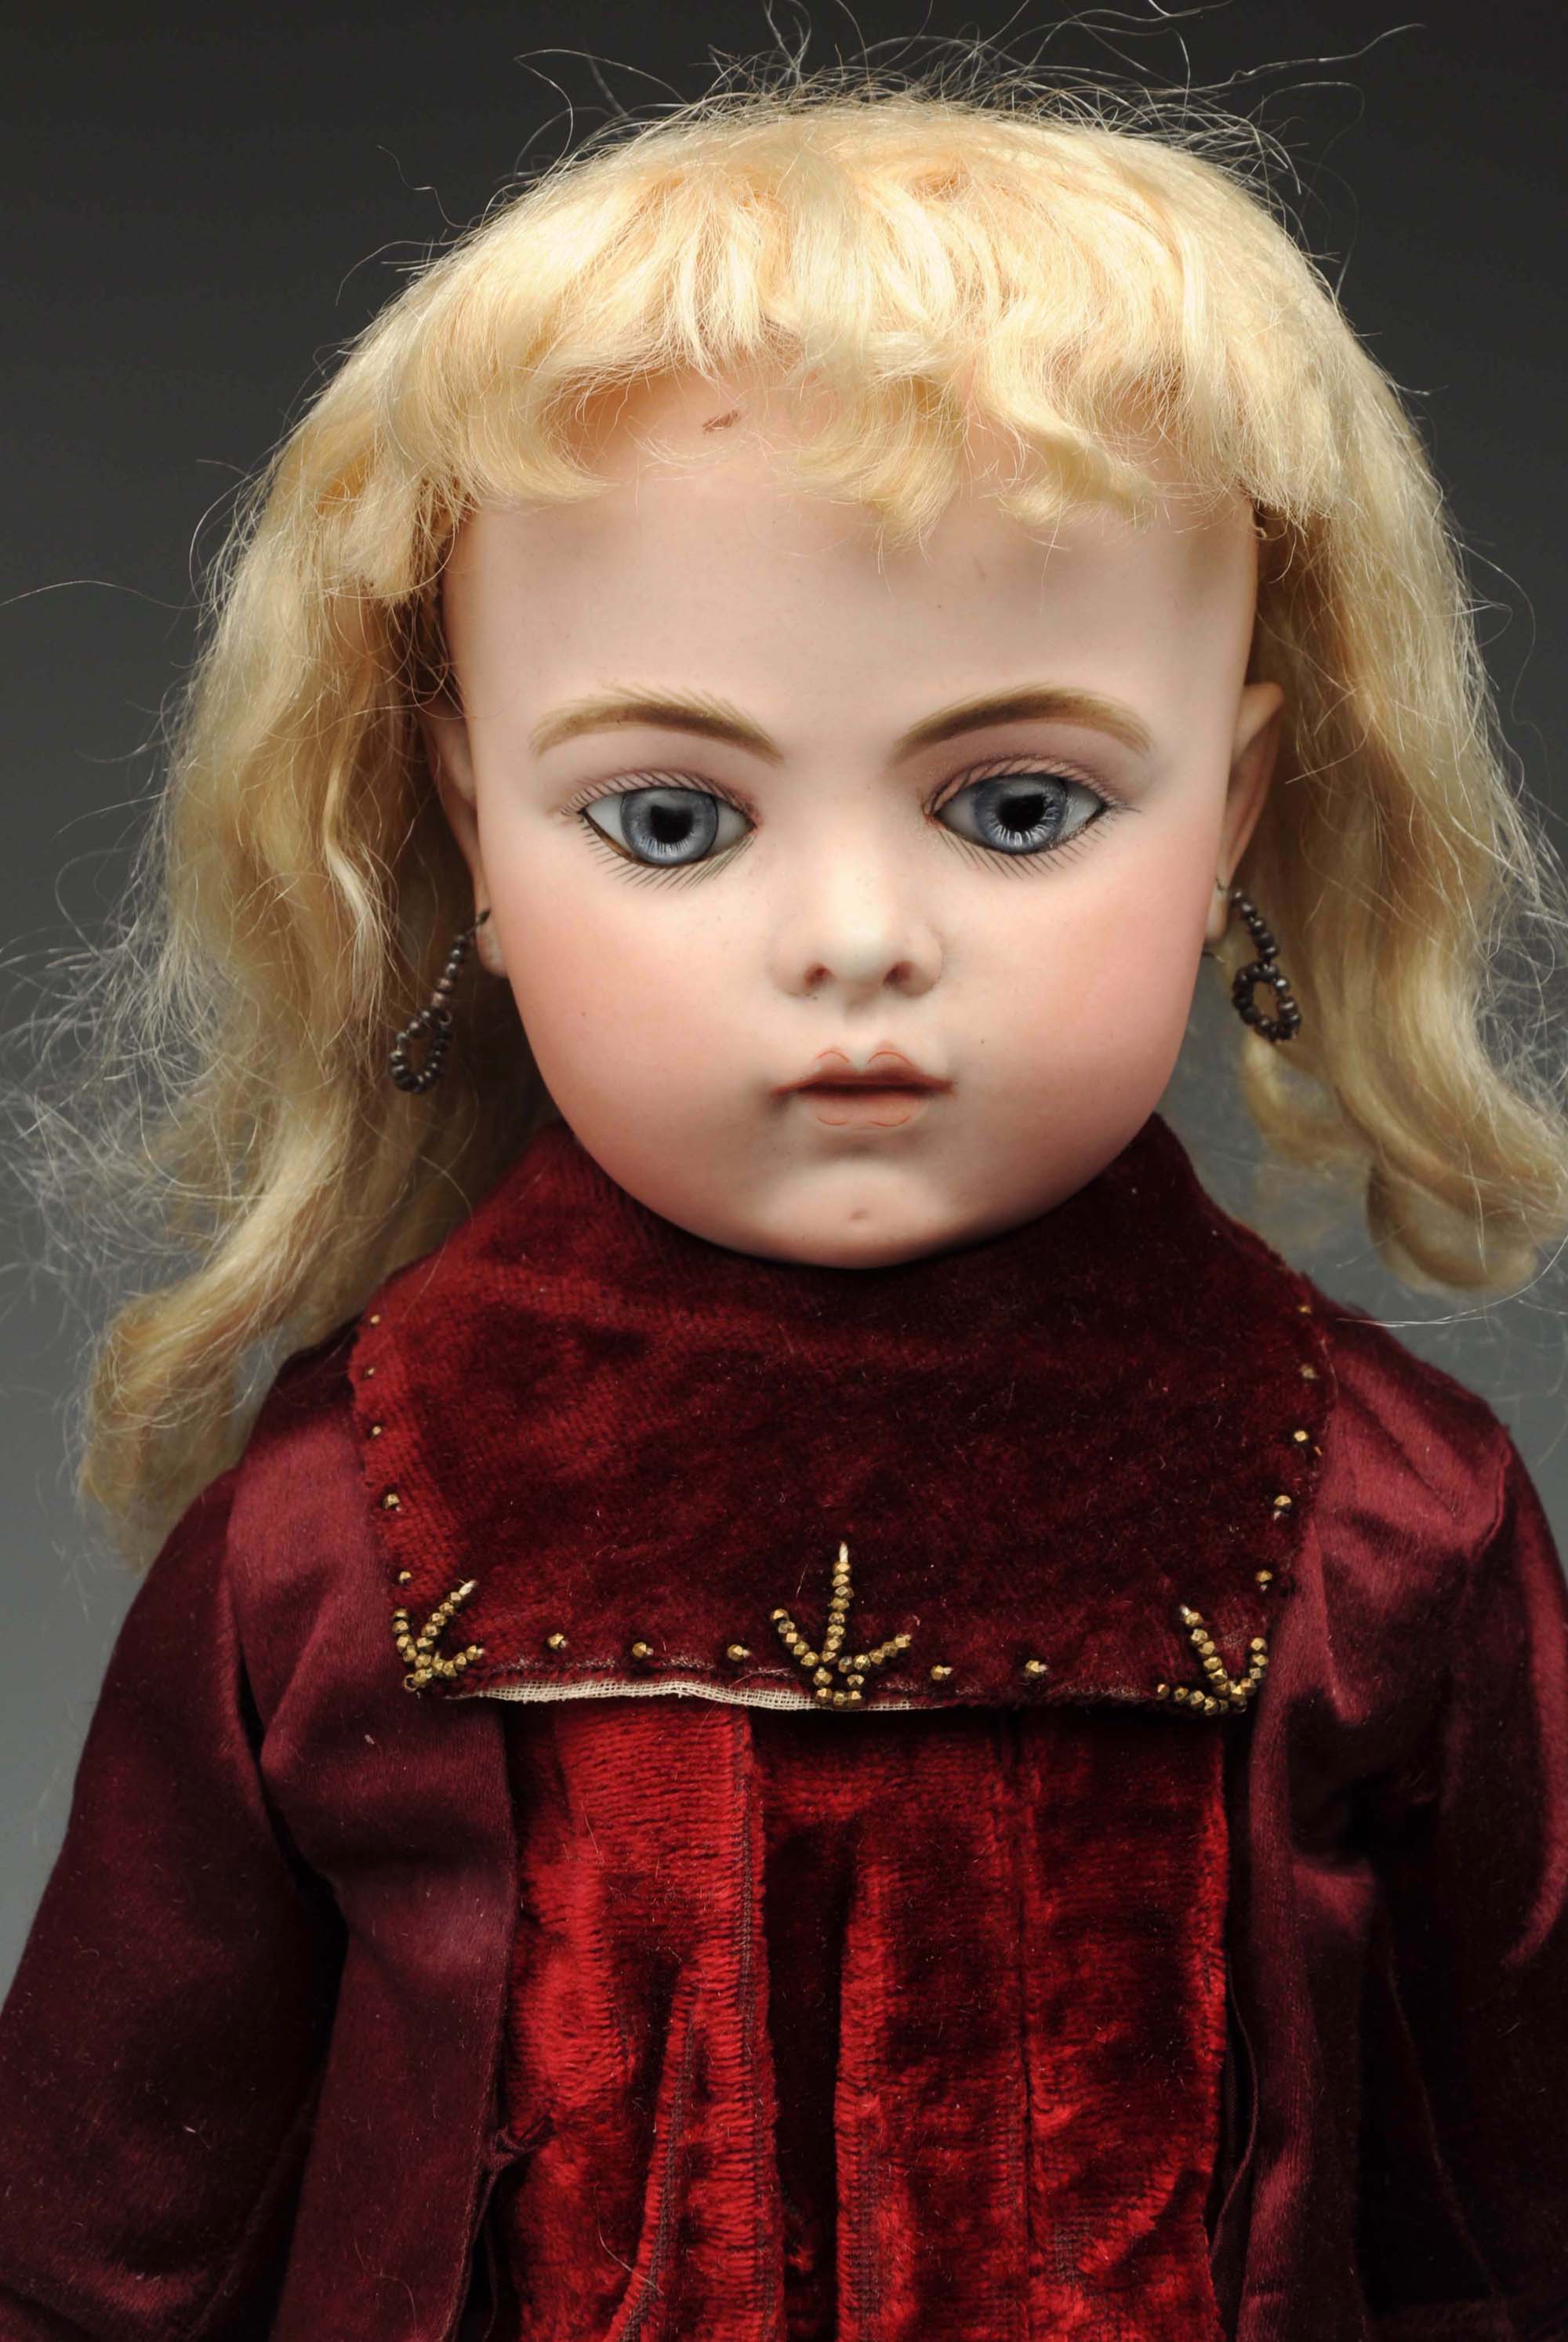 Early, 21-inch Bru Jne 7 bisque-head, leather-body doll, est. $12,000-$16,000. Morphy Auctions image